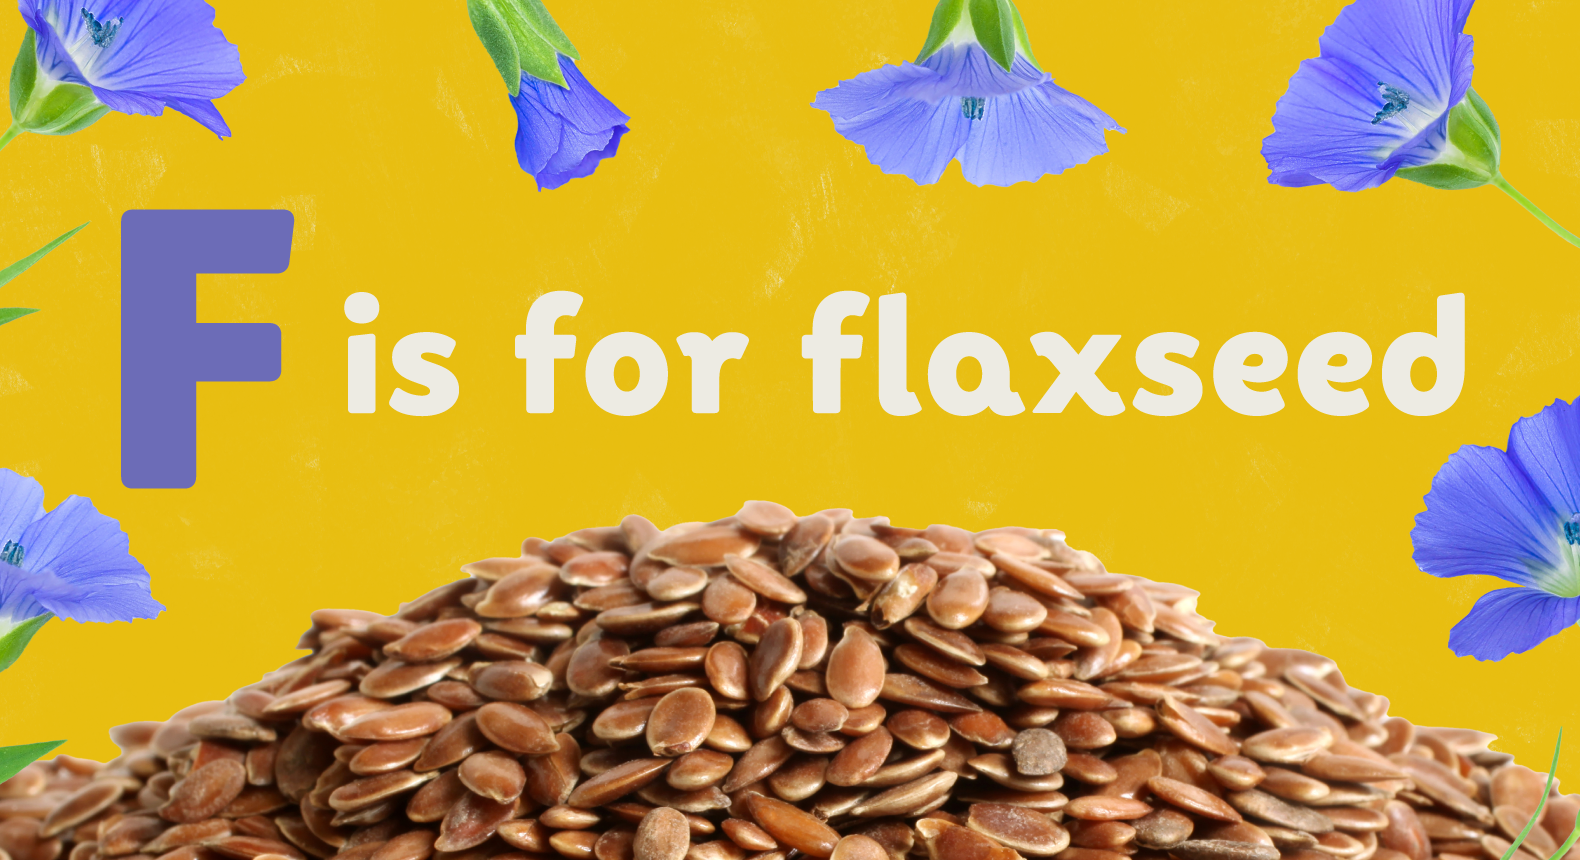 image that says f is for flaxseed